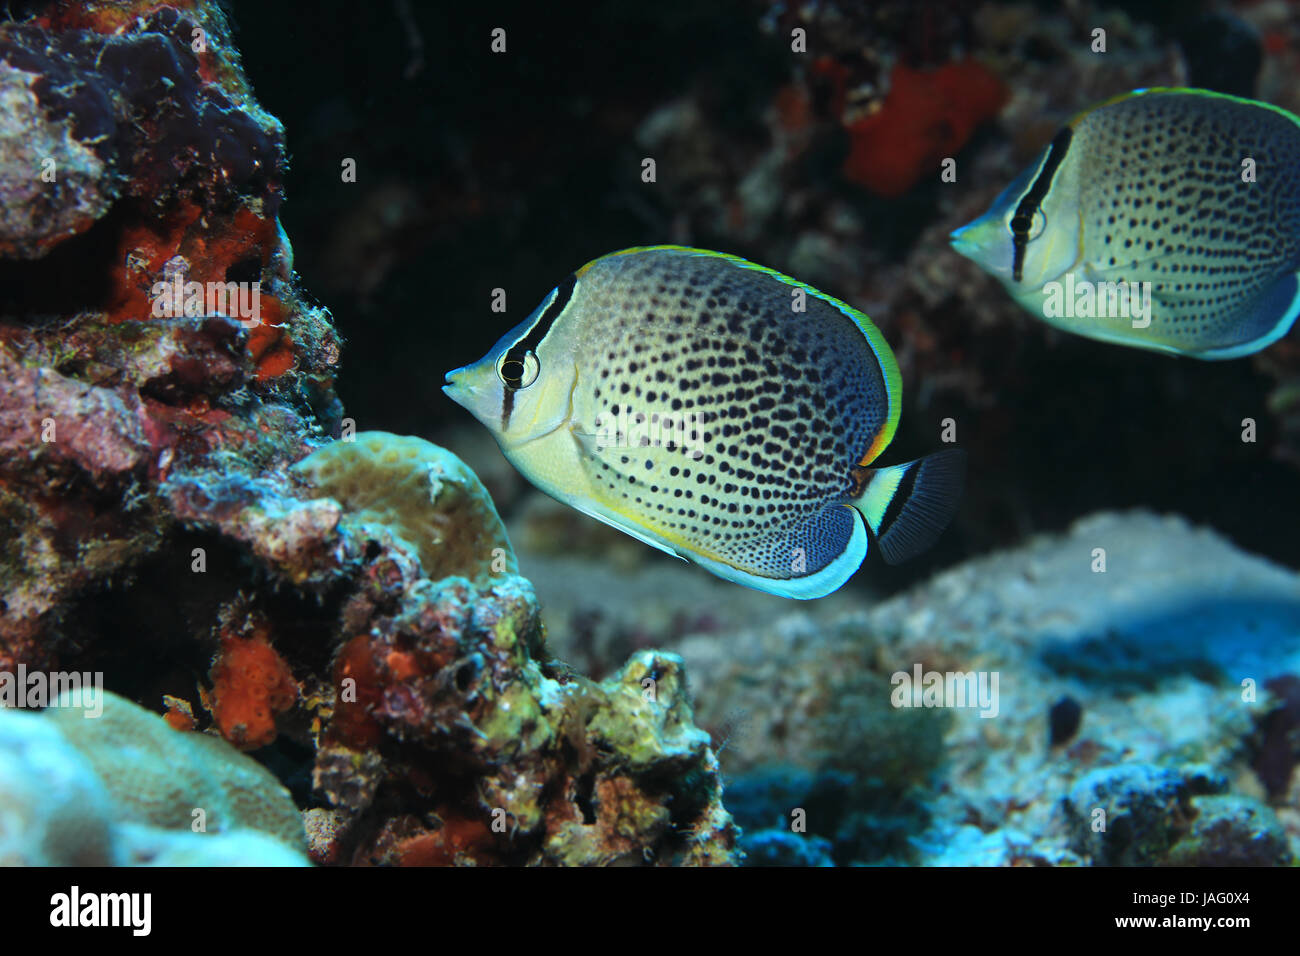 Peppered butterflyfish (Chaetodon guttatissimus) underwater in the tropical coral reef Stock Photo